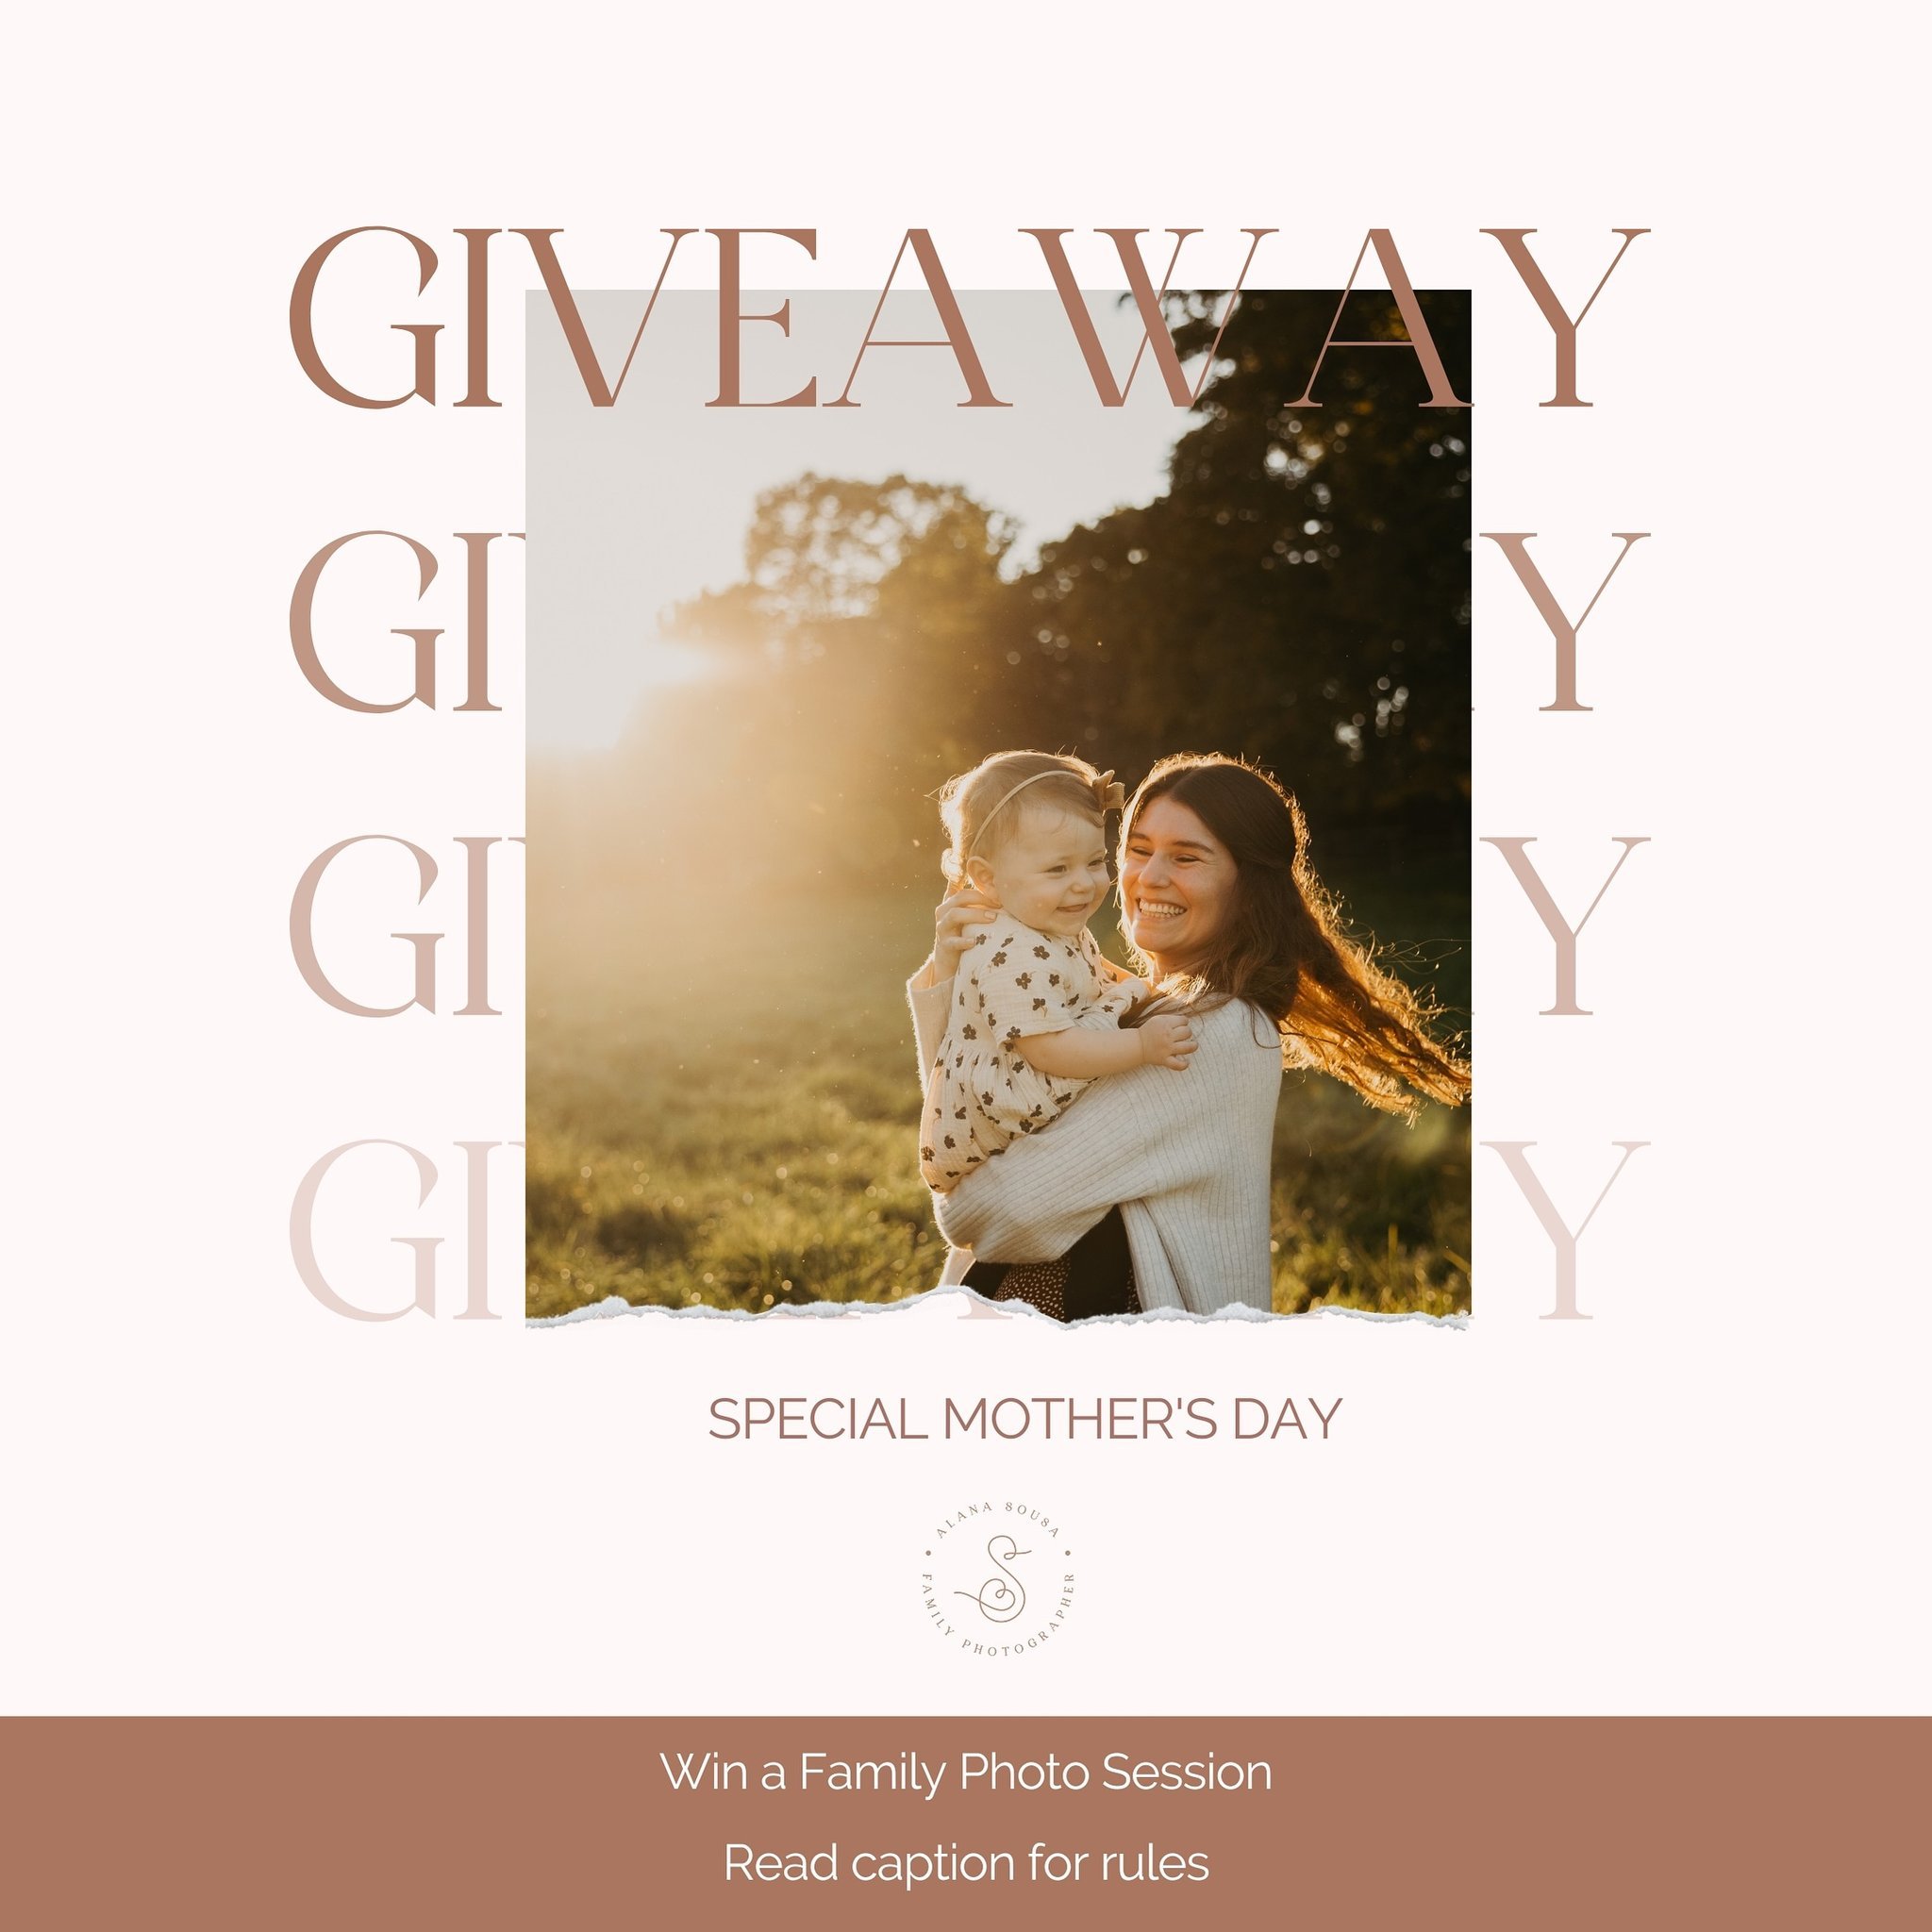 It&rsquo;s my mom&rsquo;s birthday today, and with Mother&rsquo;s Day just around the corner, I&rsquo;m spreading the joy with an exciting giveaway! 📸✨

I'm thrilled to offer one lucky winner a Family Photo Session to capture beautiful moments in 20